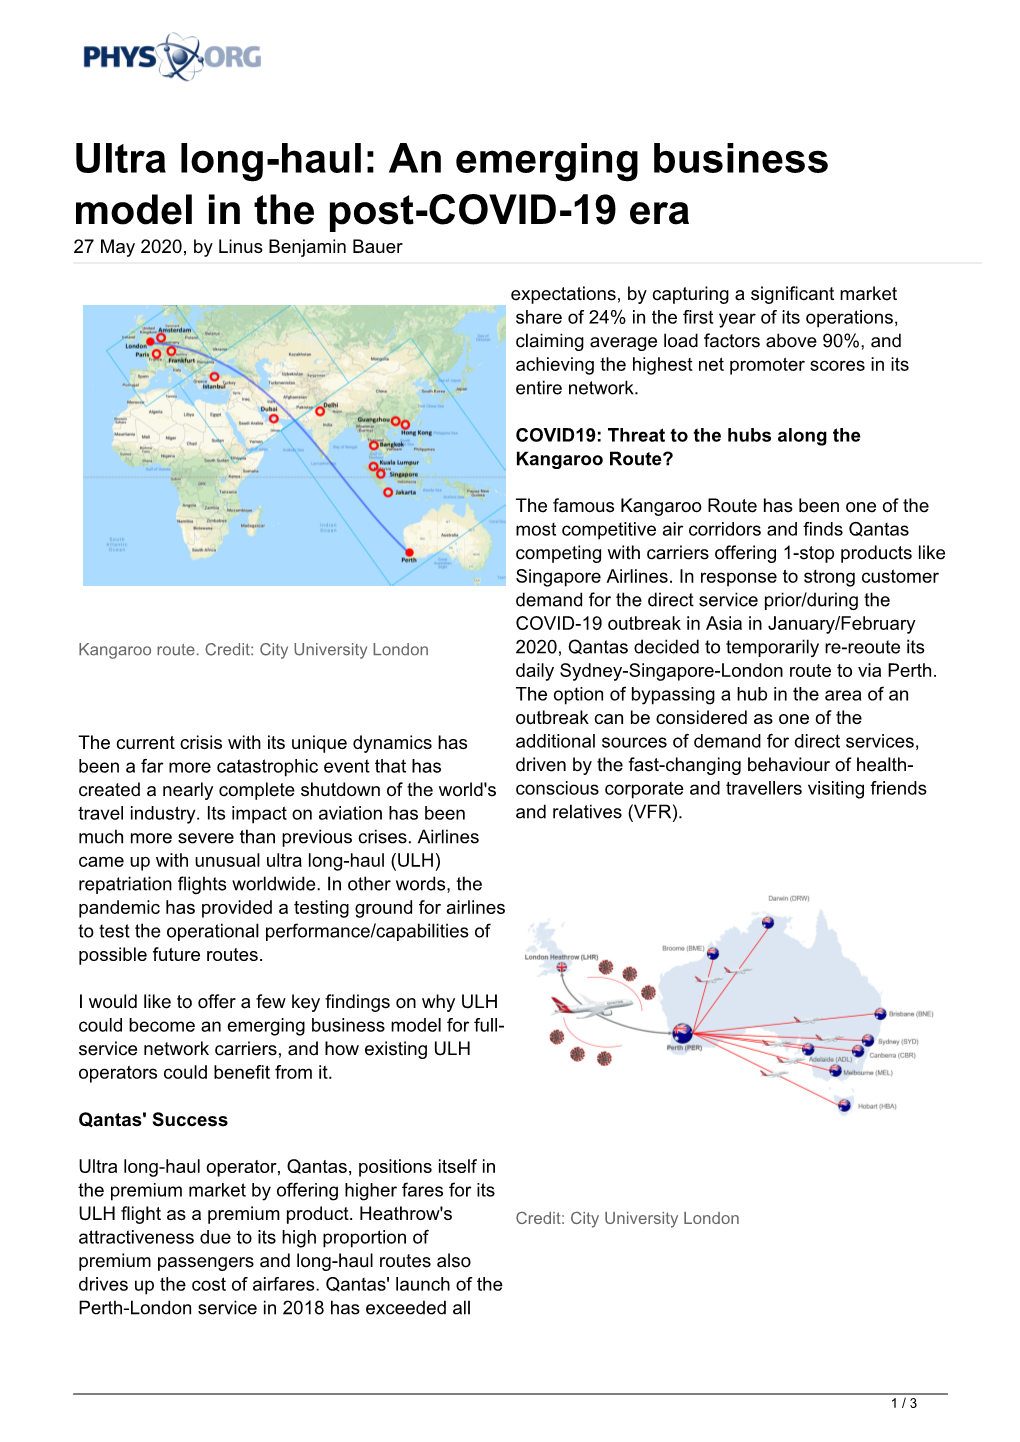 Ultra Long-Haul: an Emerging Business Model in the Post-COVID-19 Era 27 May 2020, by Linus Benjamin Bauer